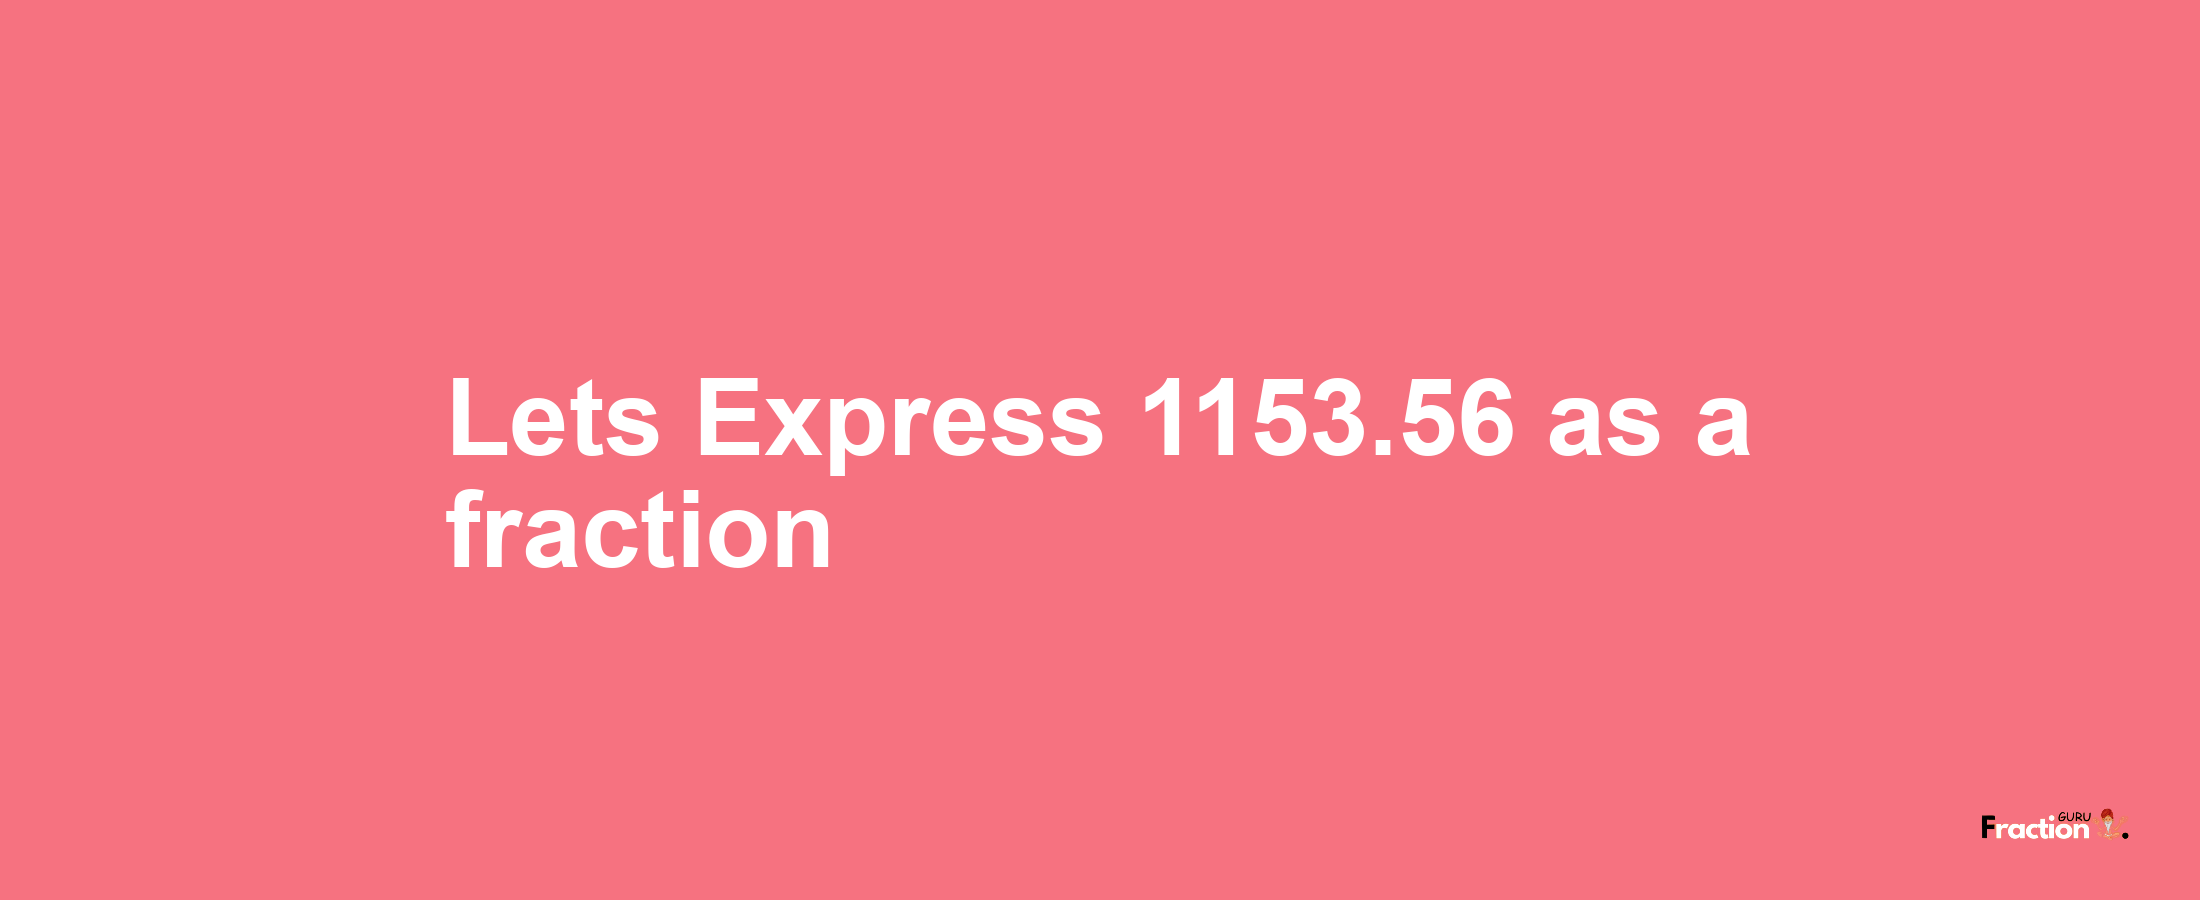 Lets Express 1153.56 as afraction